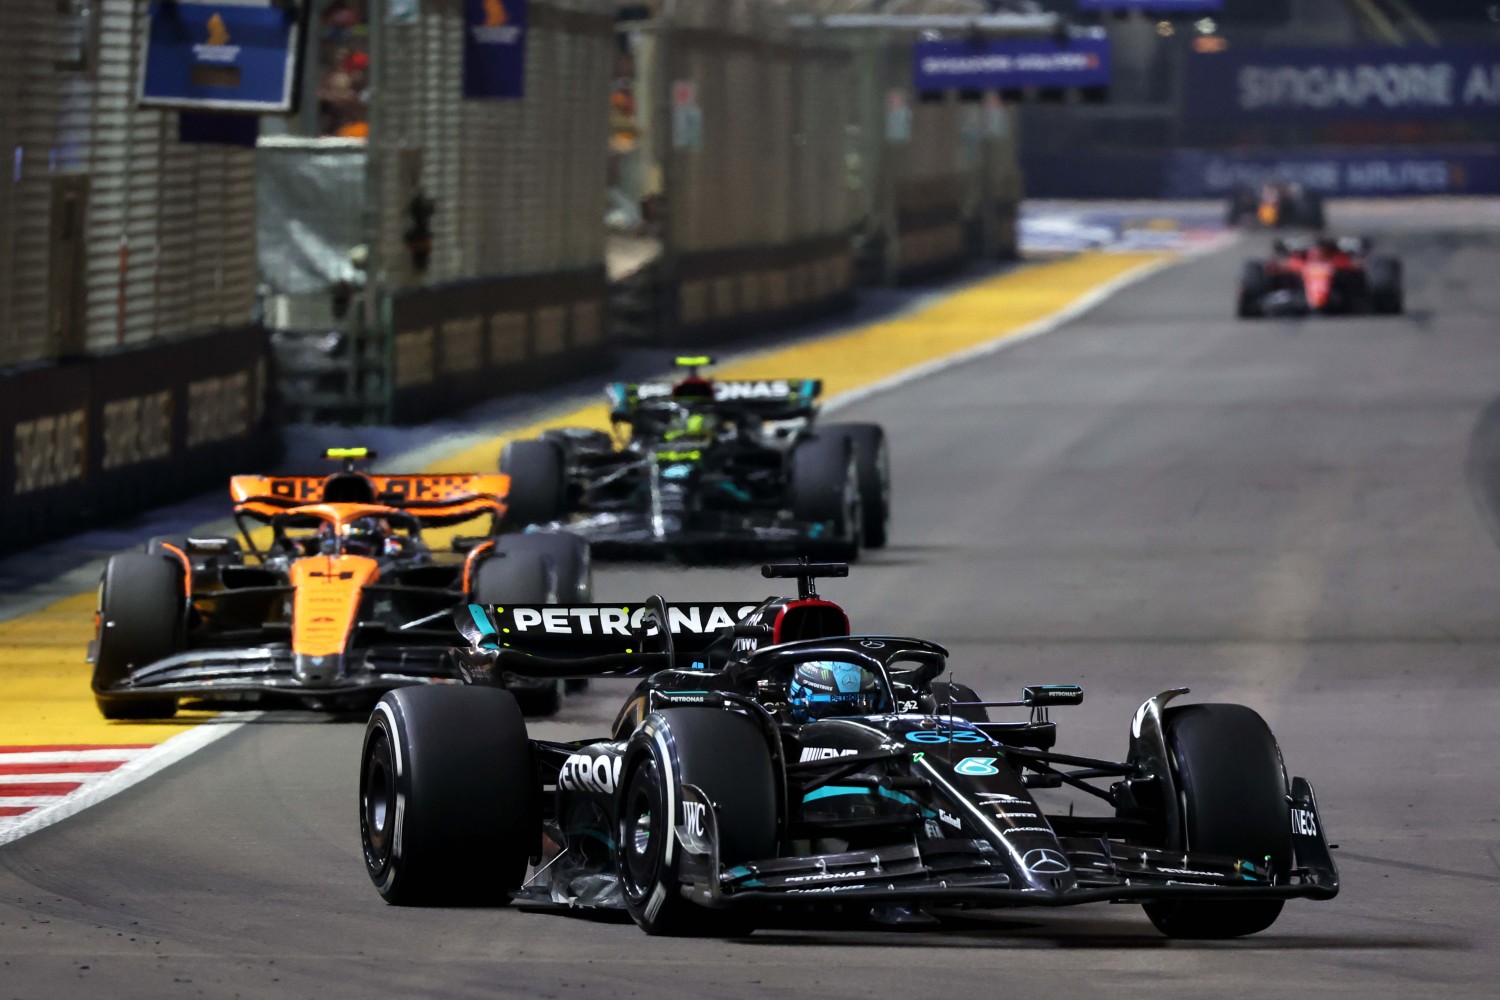 George Russell Leads Lando Norris and Lewis Hamilton in 2023 Singapore Grand Prix, Sunday - Steve Etherington for Mercedes